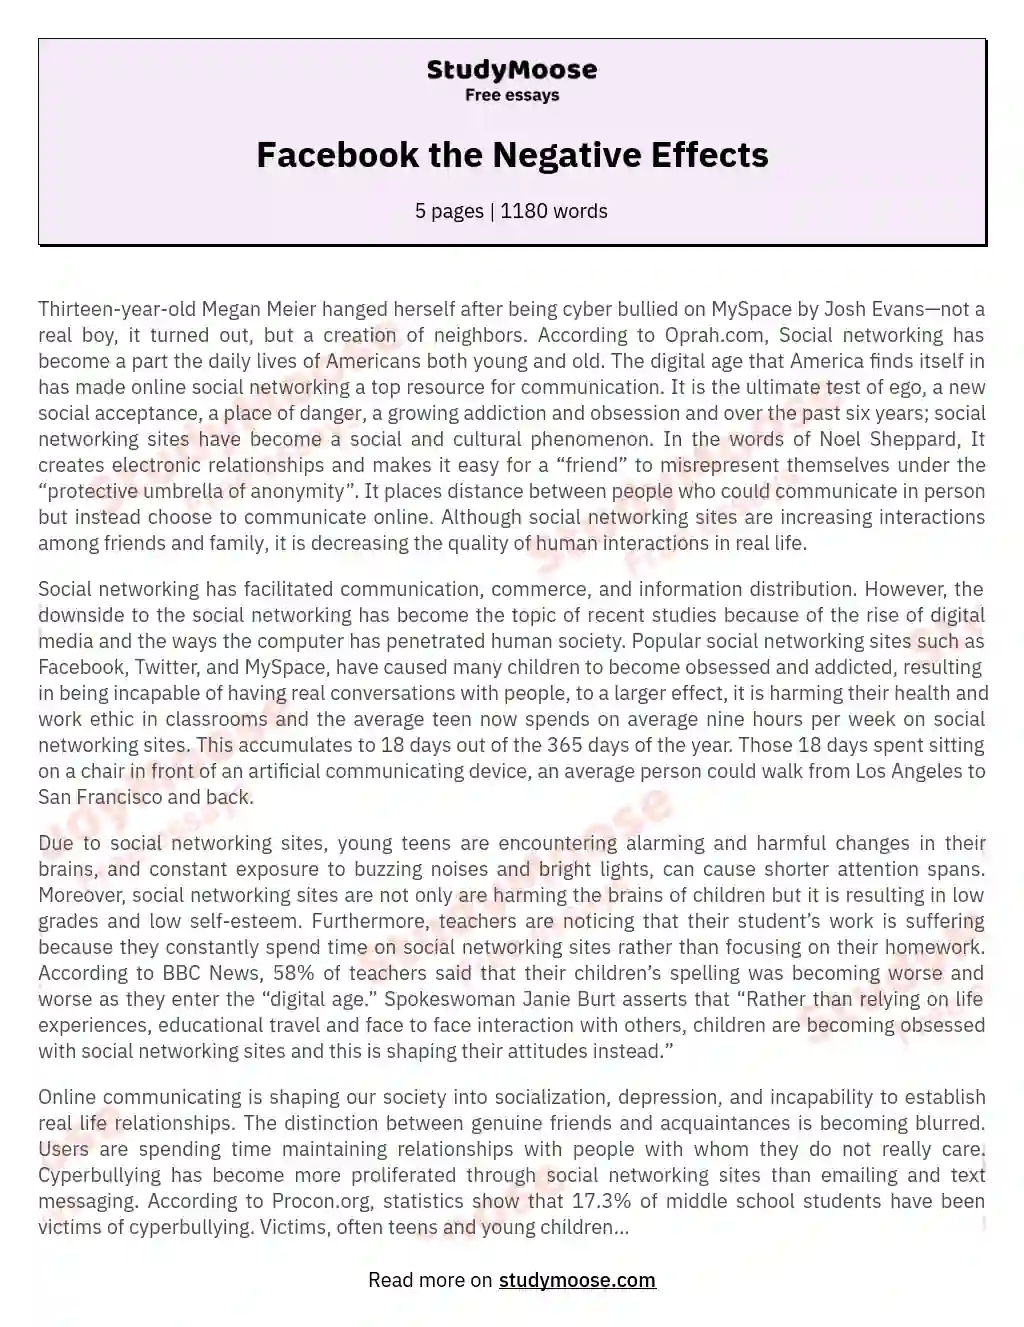 Facebook the Negative Effects essay